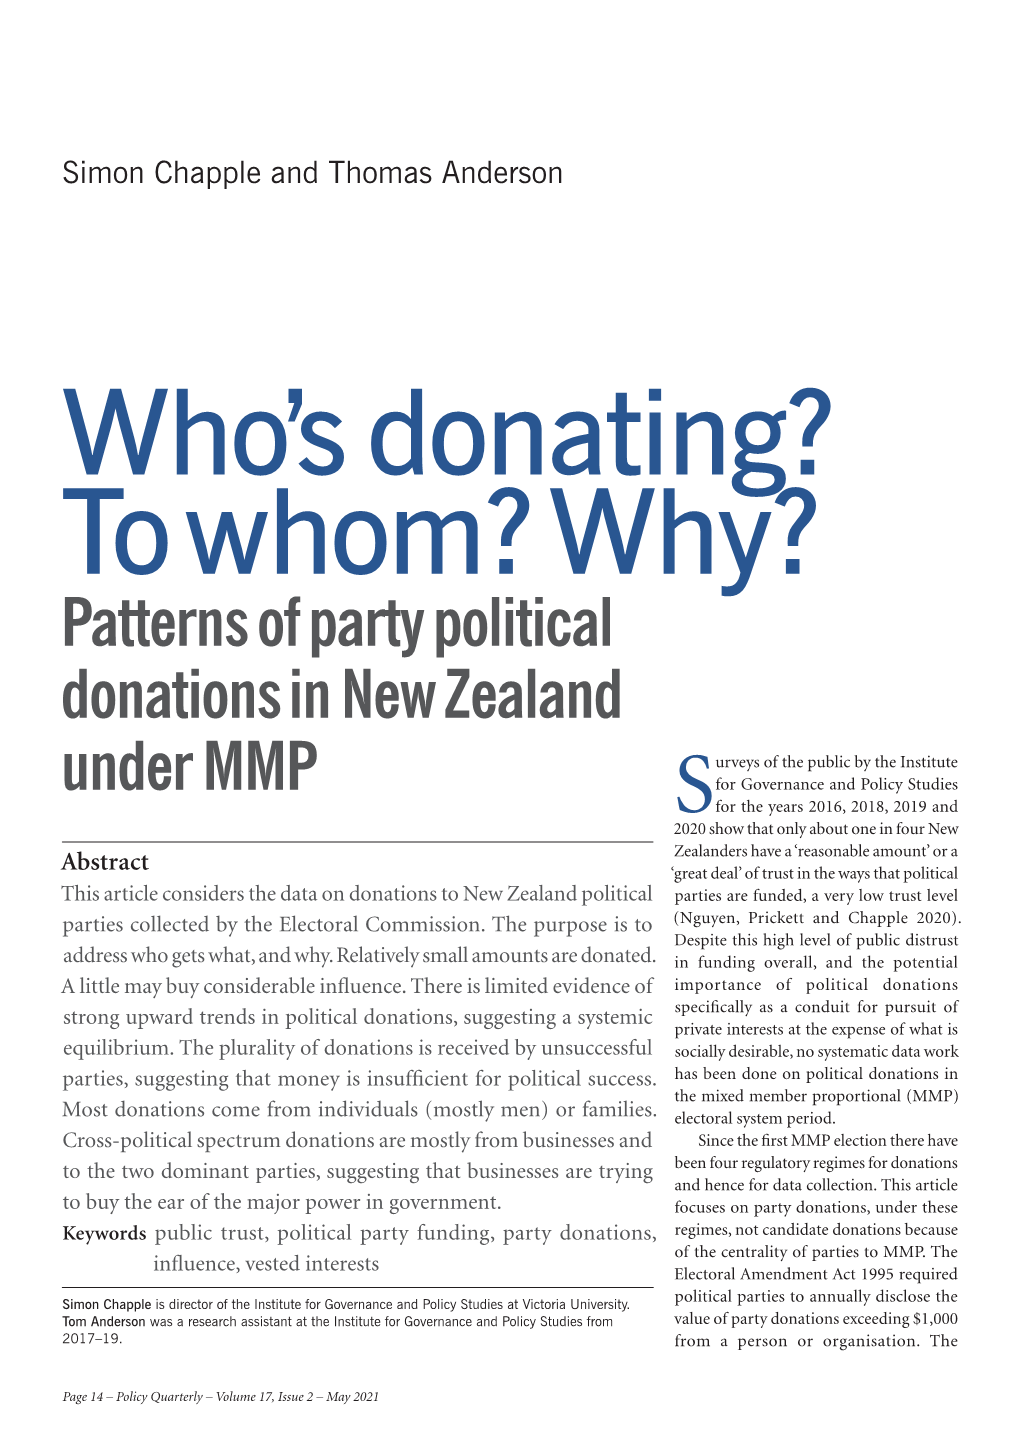 Patterns of Party Political Donations in New Zealand Under MMP